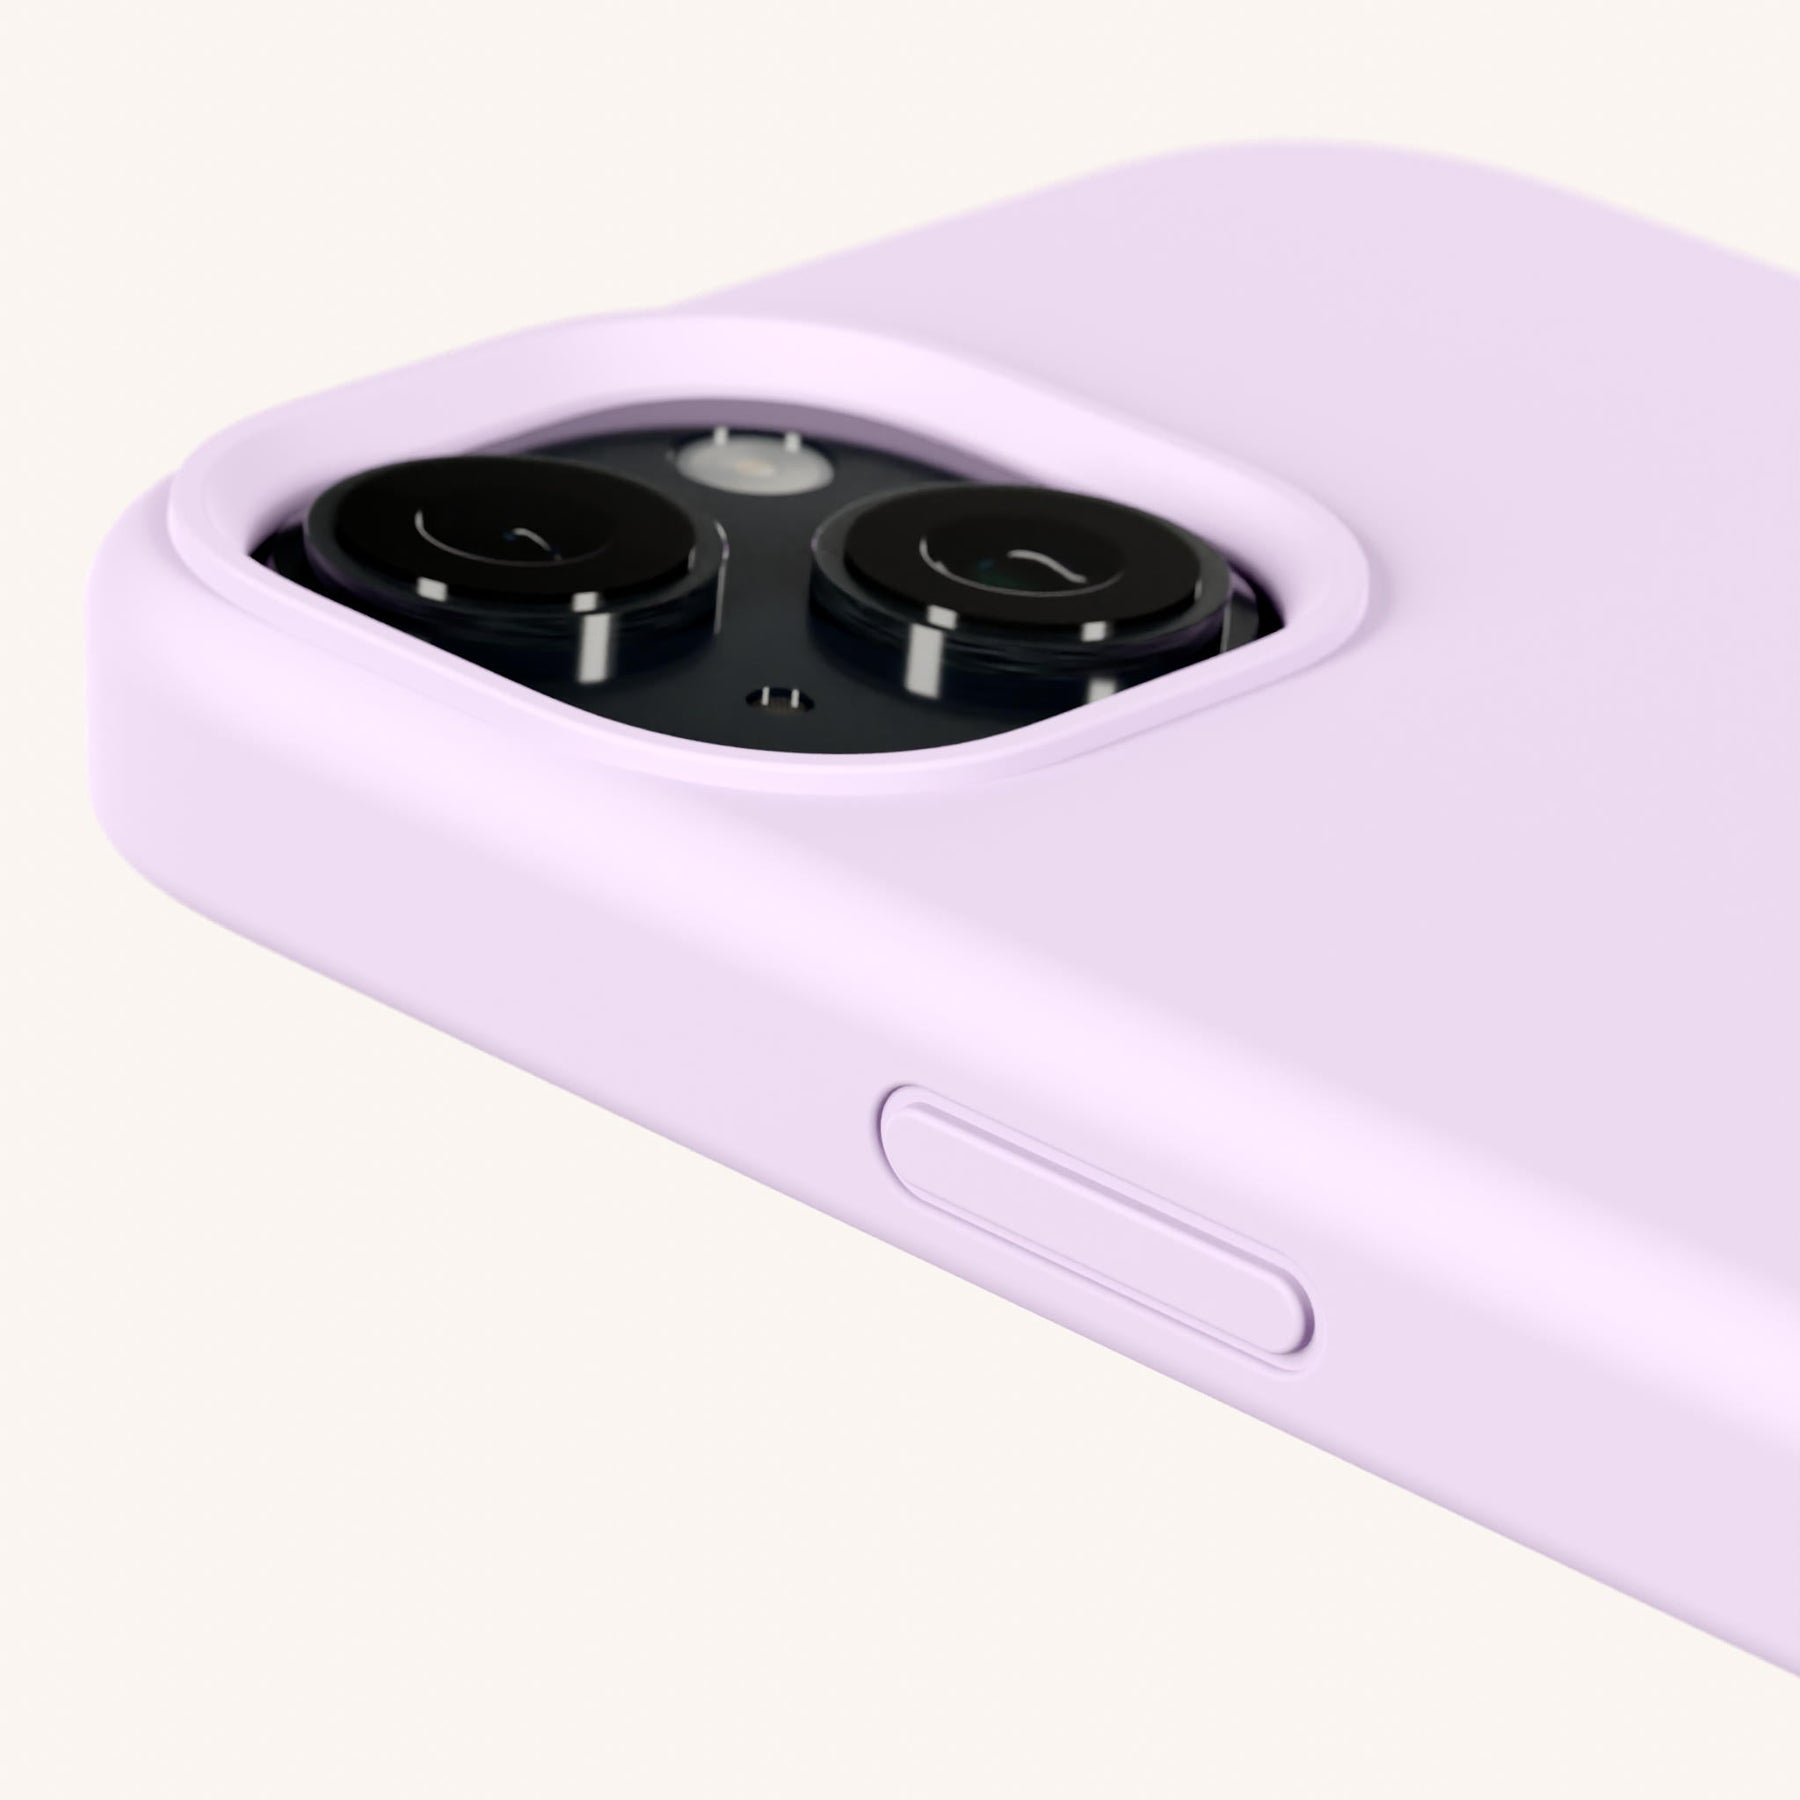 Phone Case with Eyelets in Lilac